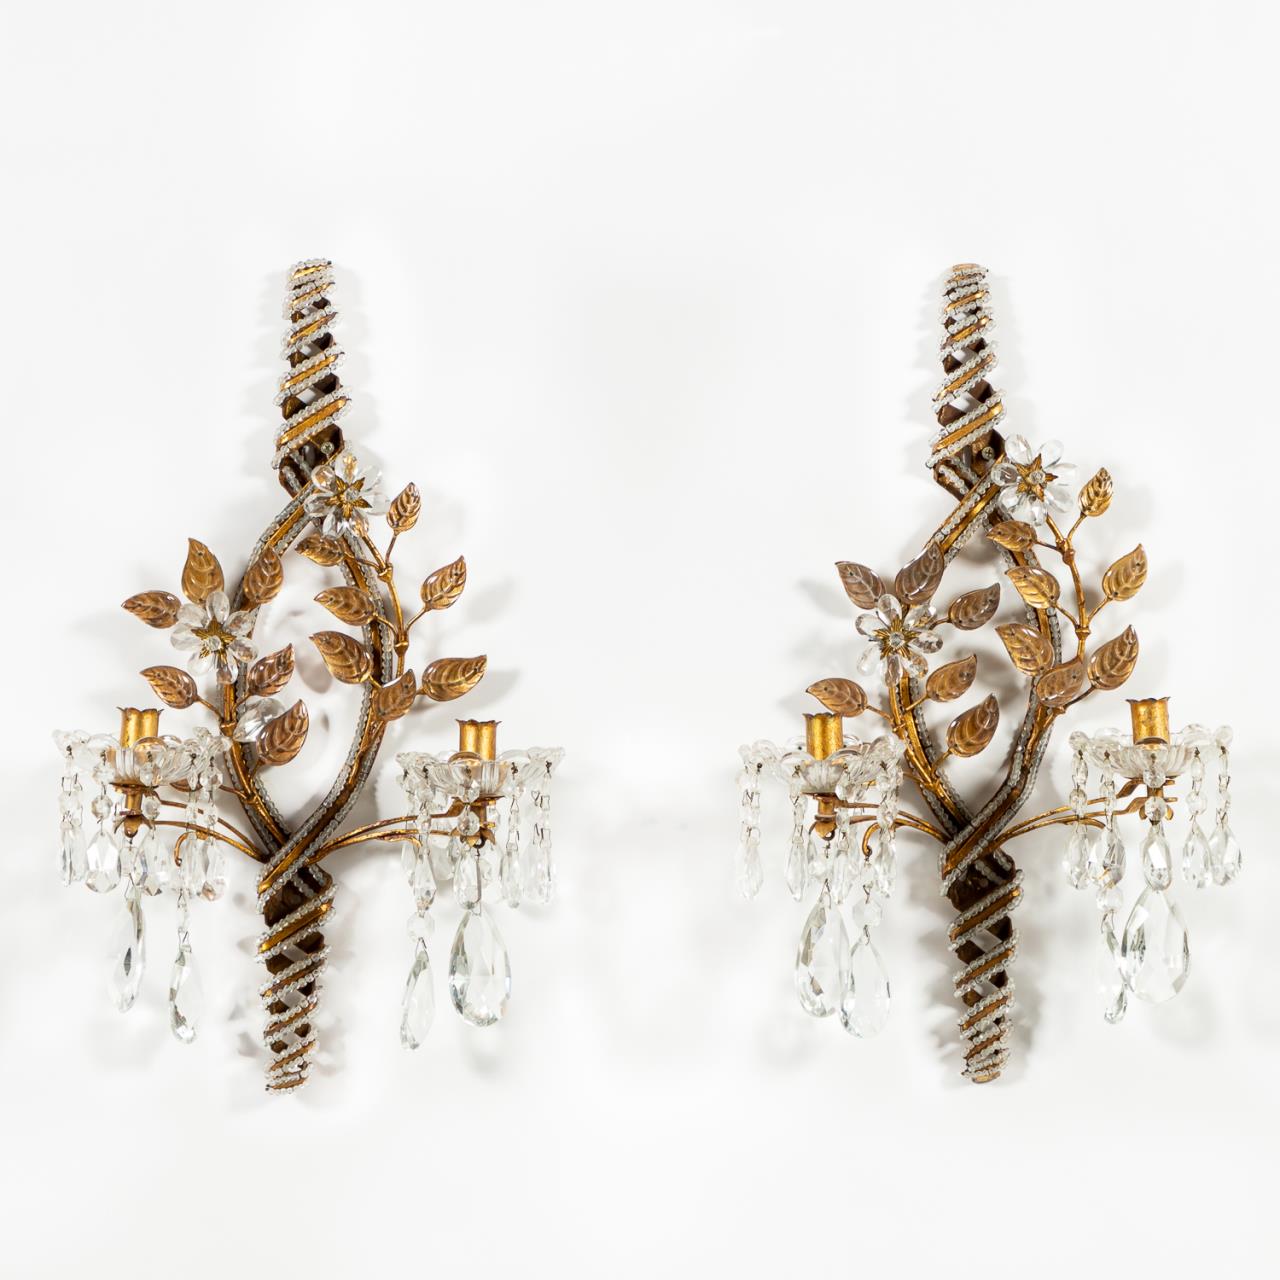 PAIR, GILT METAL AND CRYSTAL FLORAL